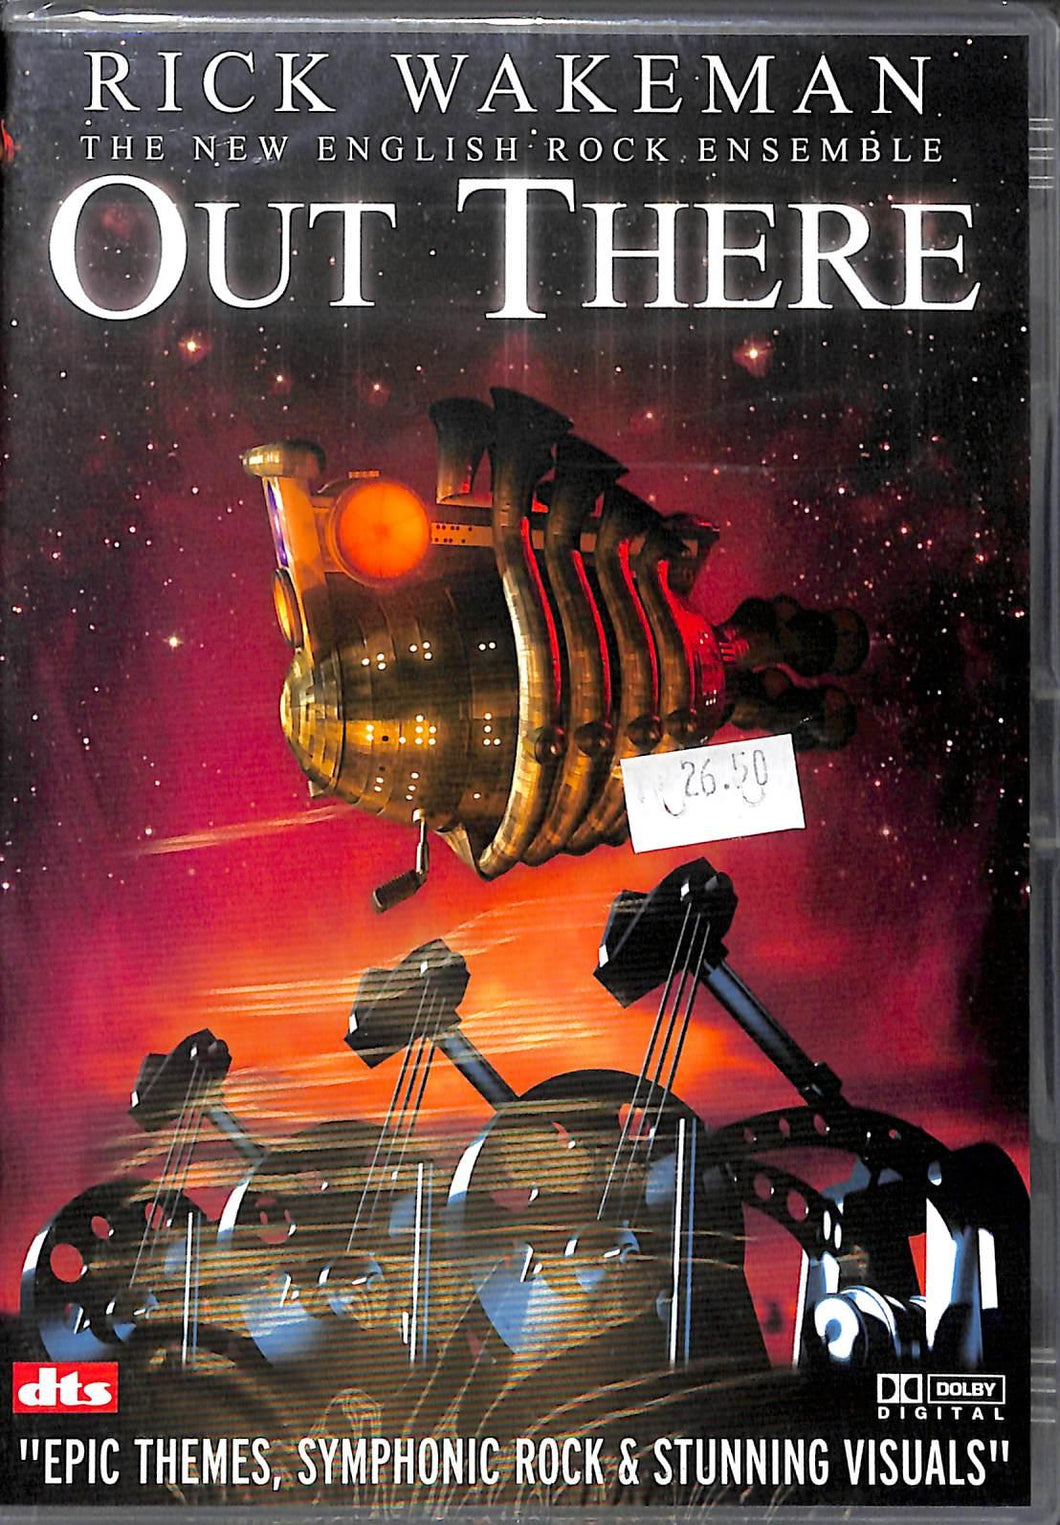 Dvd - Rick Wakeman And The New English Rock Ensemble - Out There